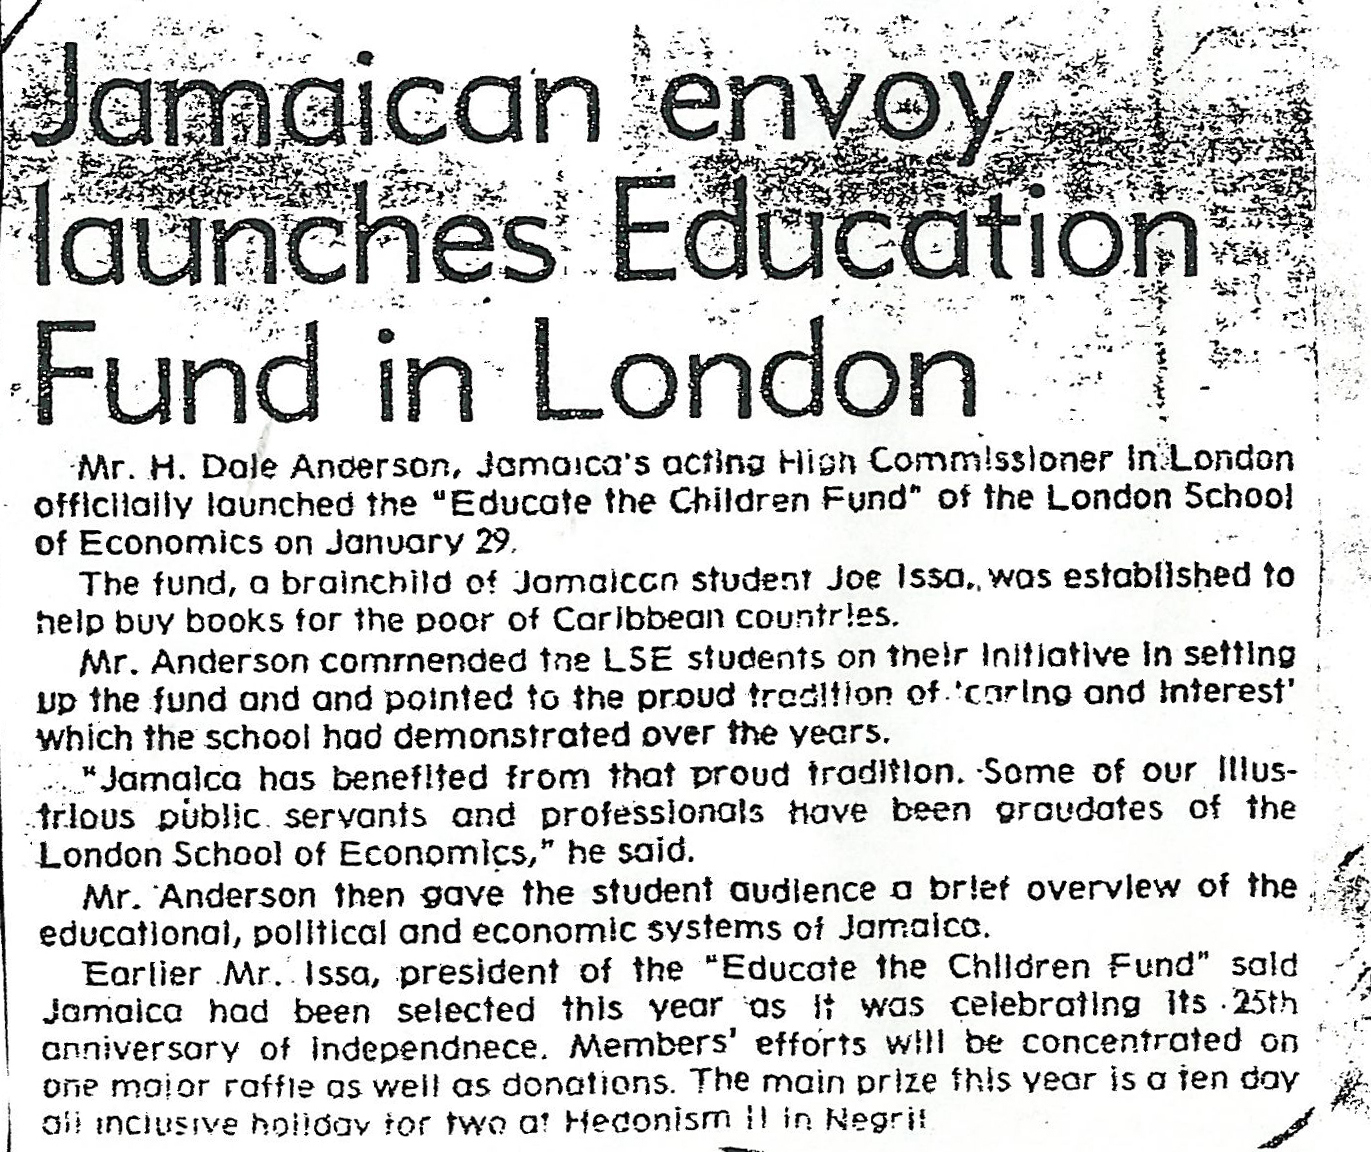 Jamaican envoy launches Education Fund in London